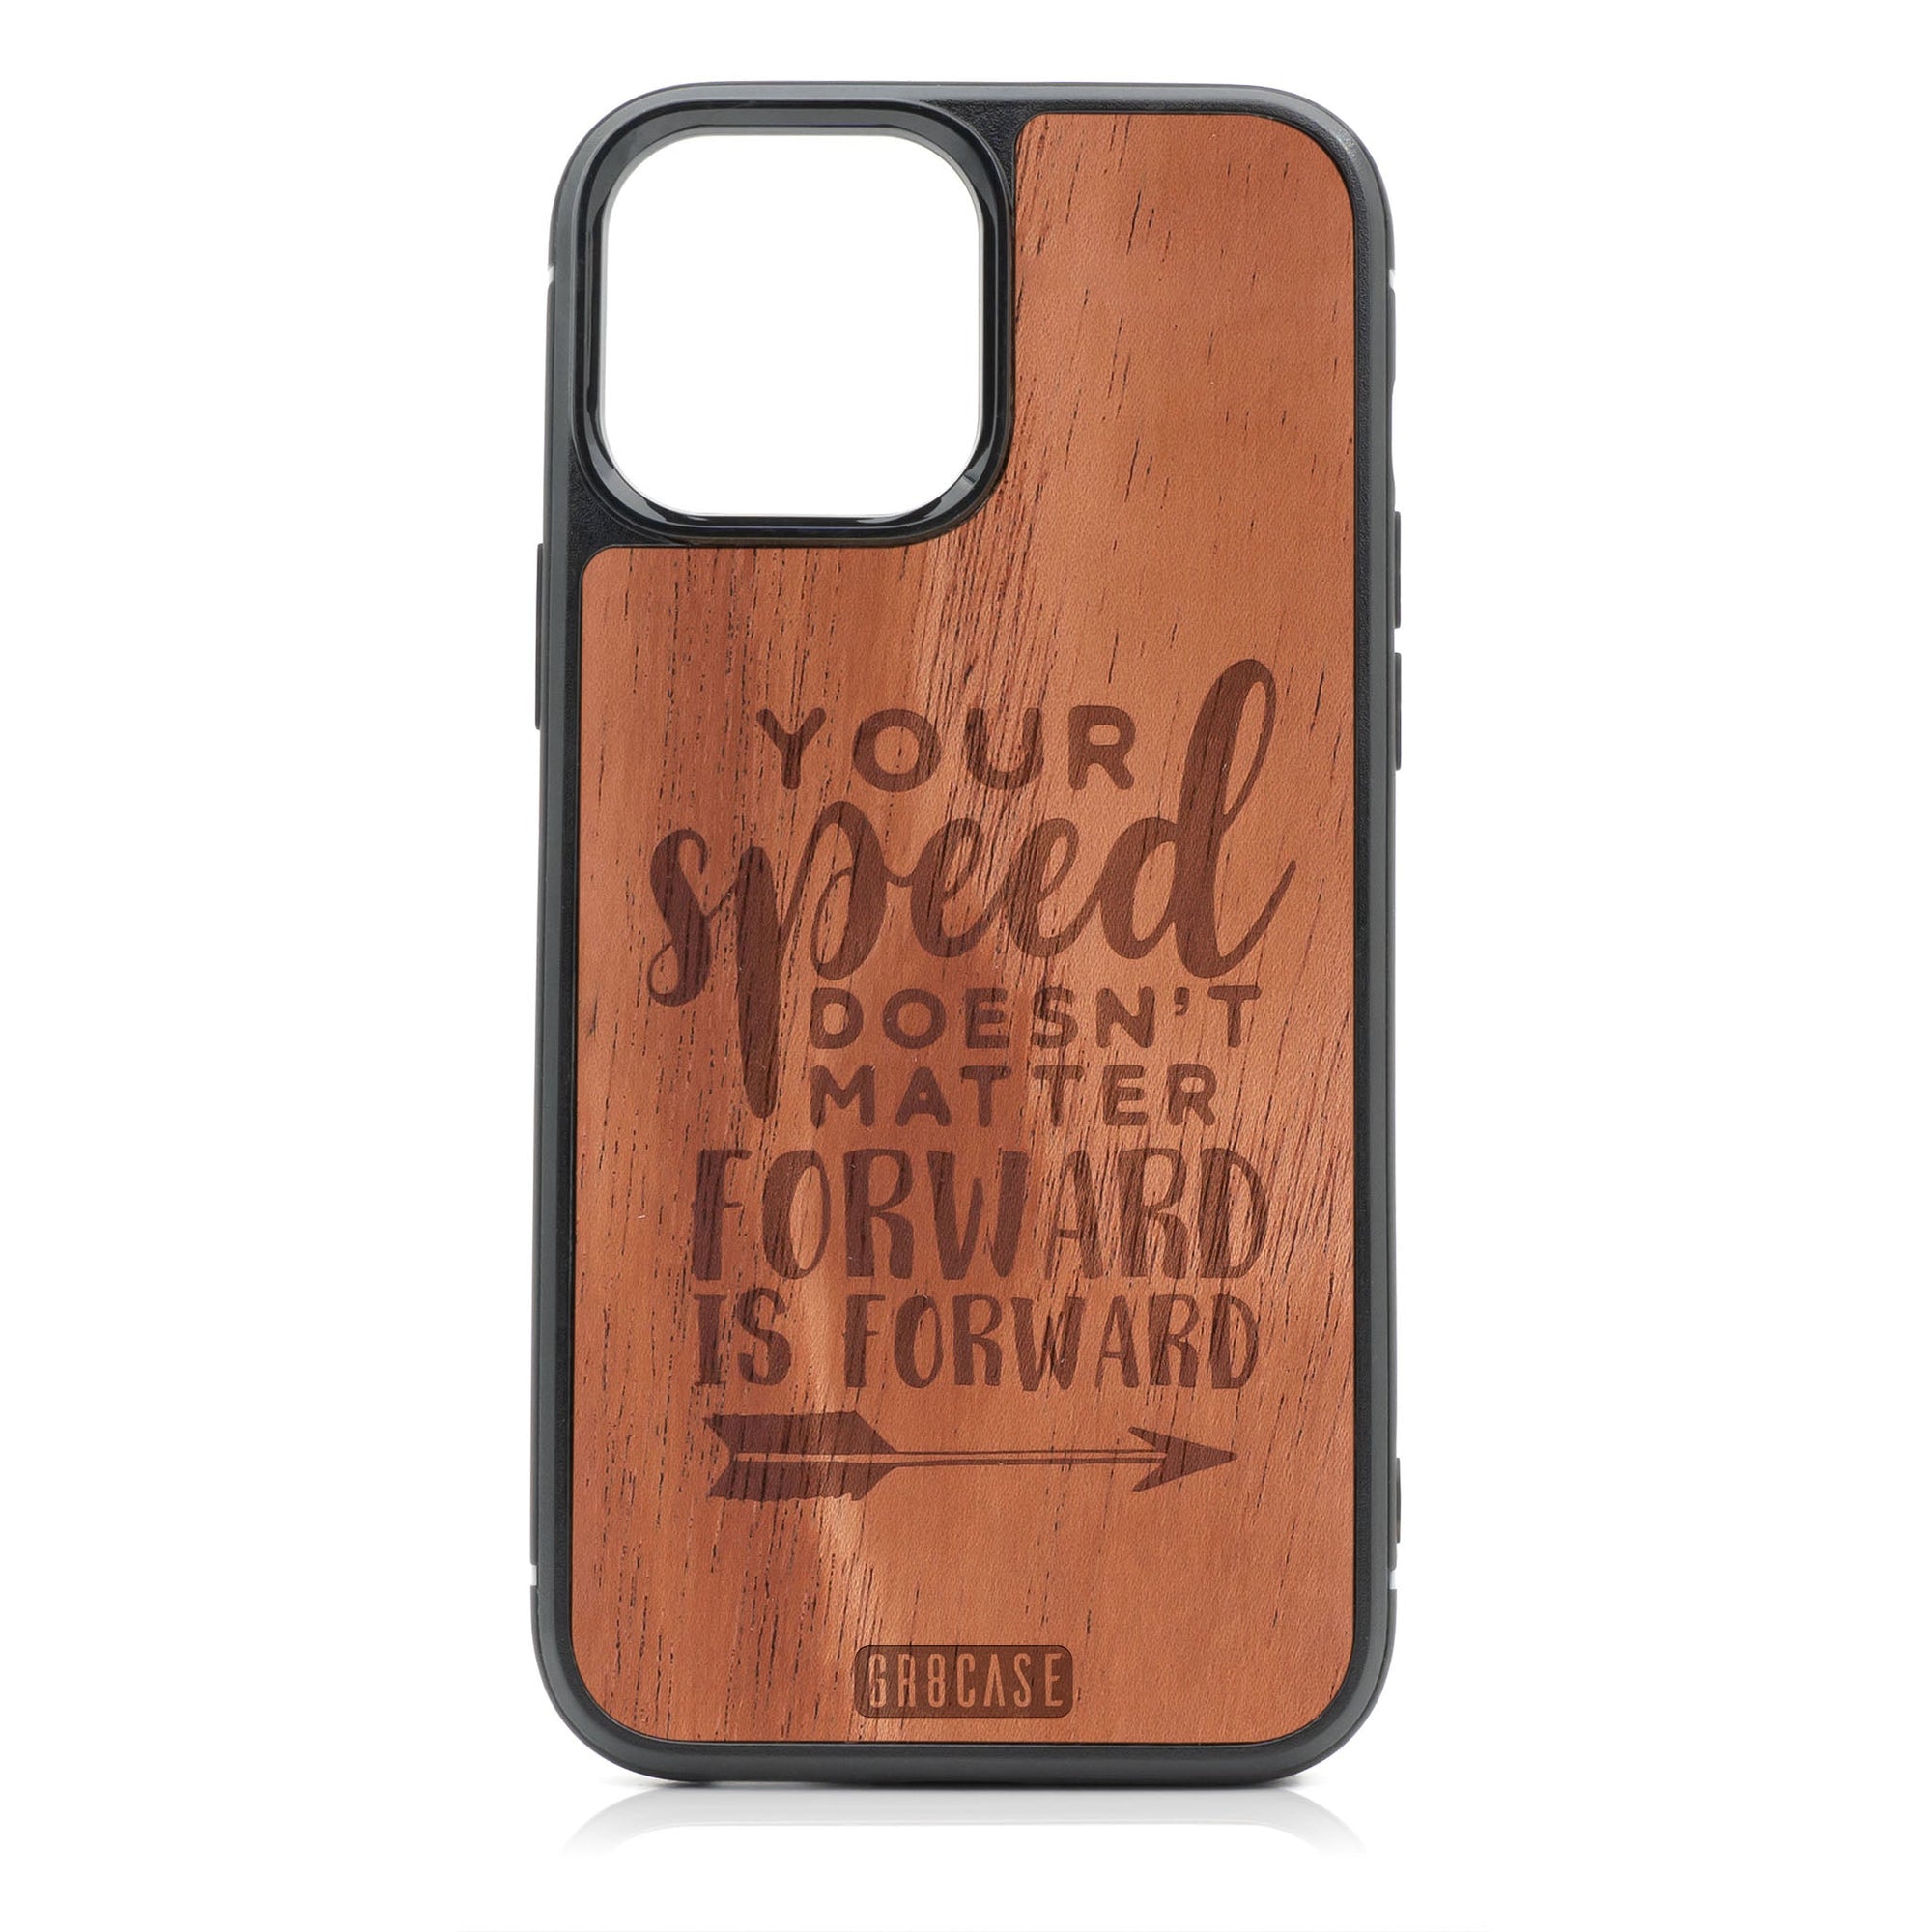 Your Speed Doesn't Matter Forward Is Forward Design Wood Case For iPhone 14 Pro Max